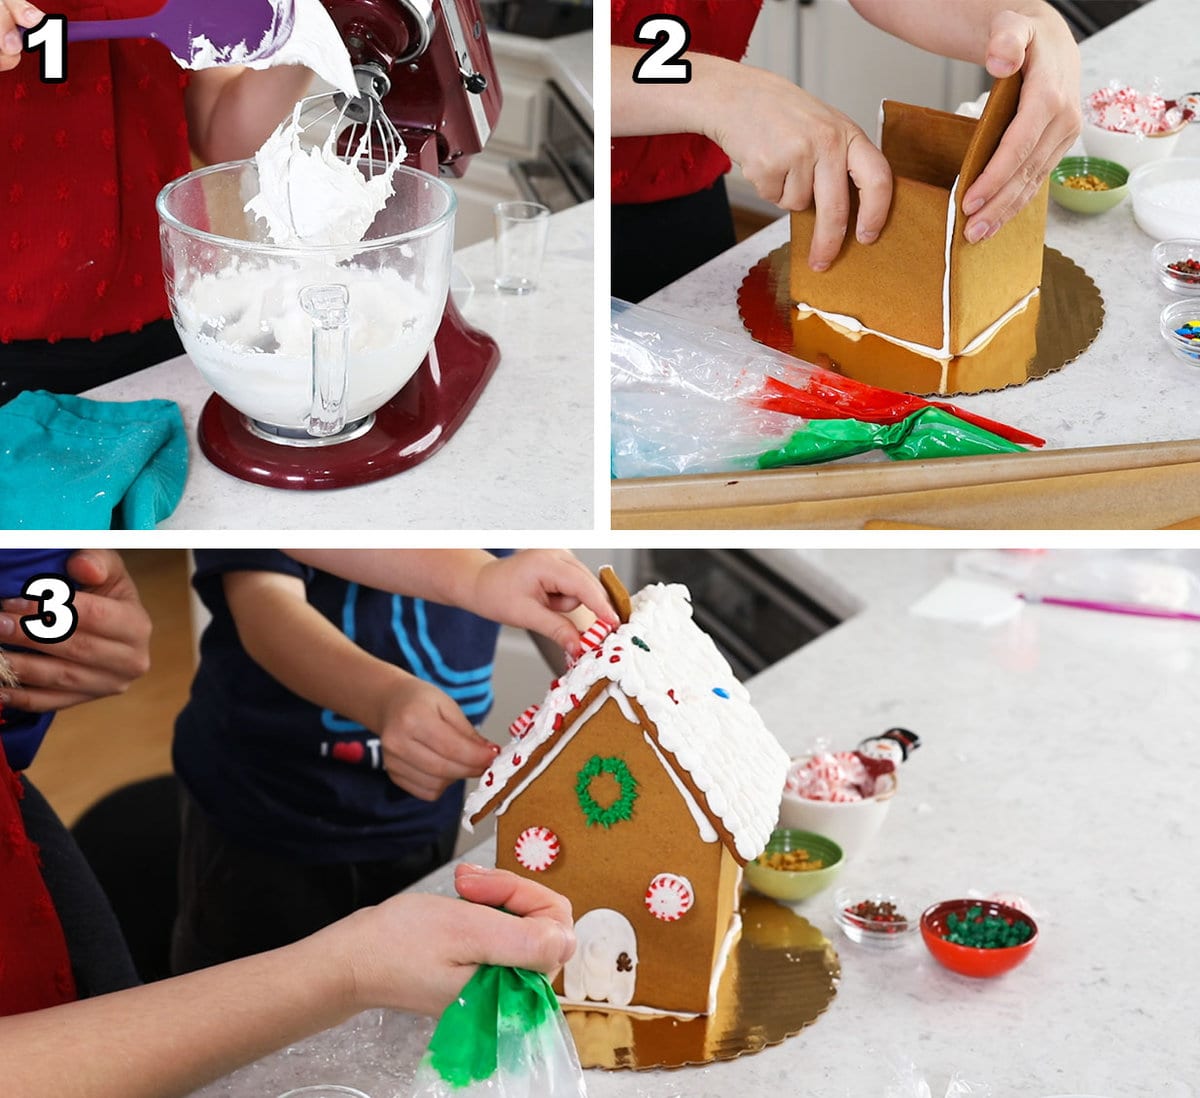 Three photos showing a gingerbread house being assembled with frosting and candies.